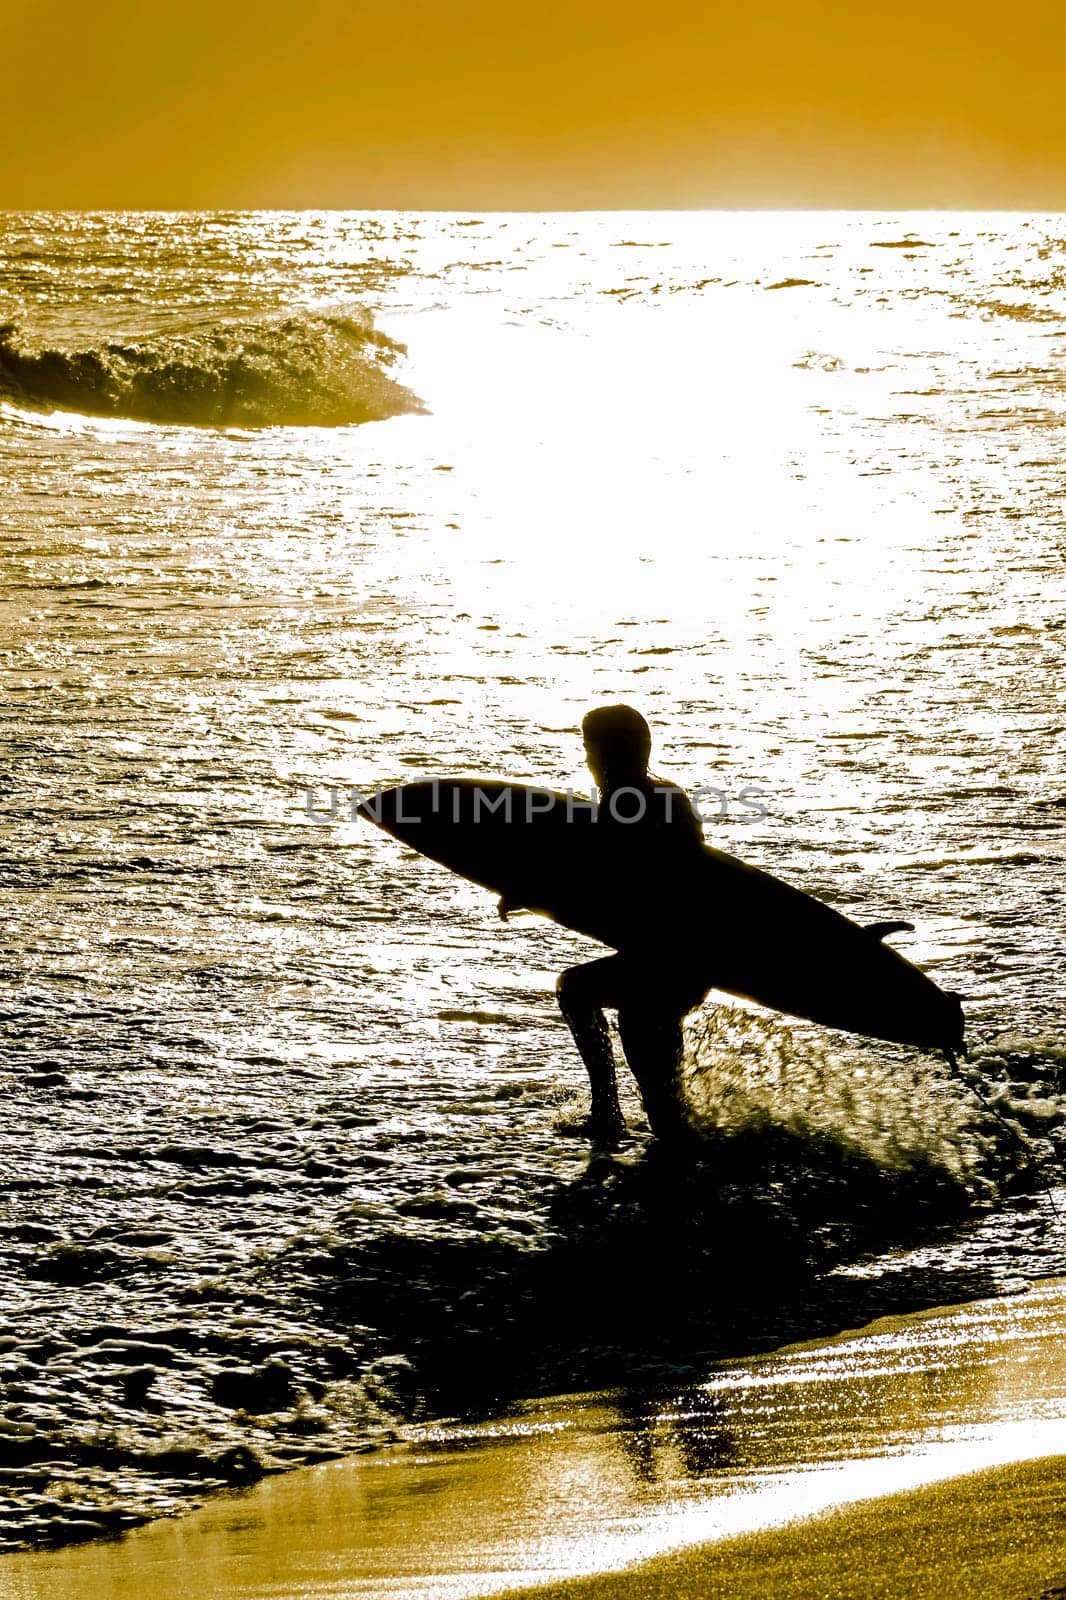 Silhouette of a surfer entering the sea with his surfboard during the sunset at Ipanema beach in Rio de Janeiro